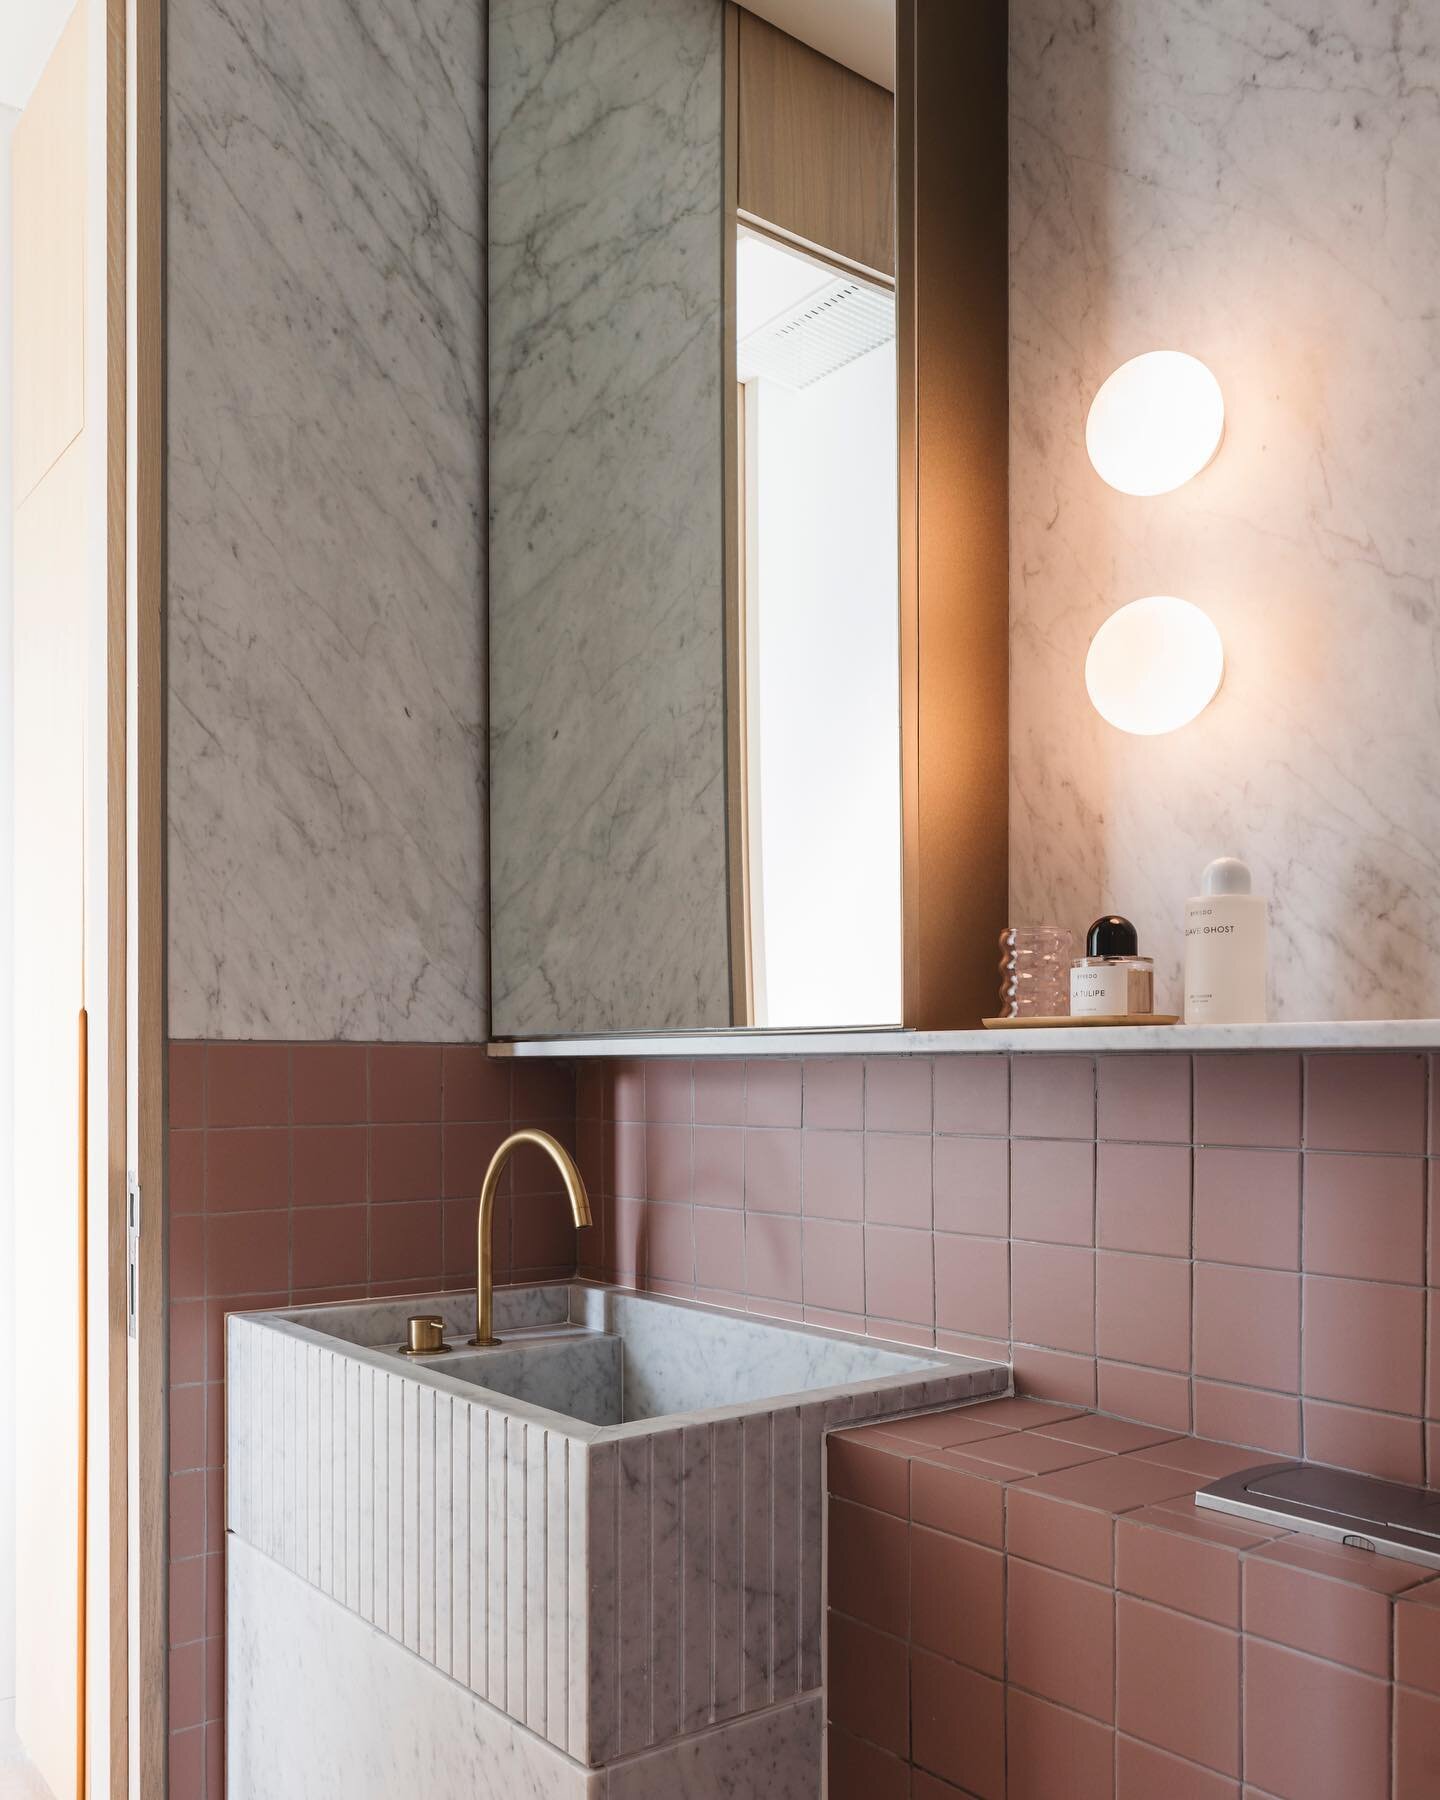 SINGAPORE APARTMENT

Second bathroom in Carrara marble and a dusty pink tile. 

📷#studioperiphery